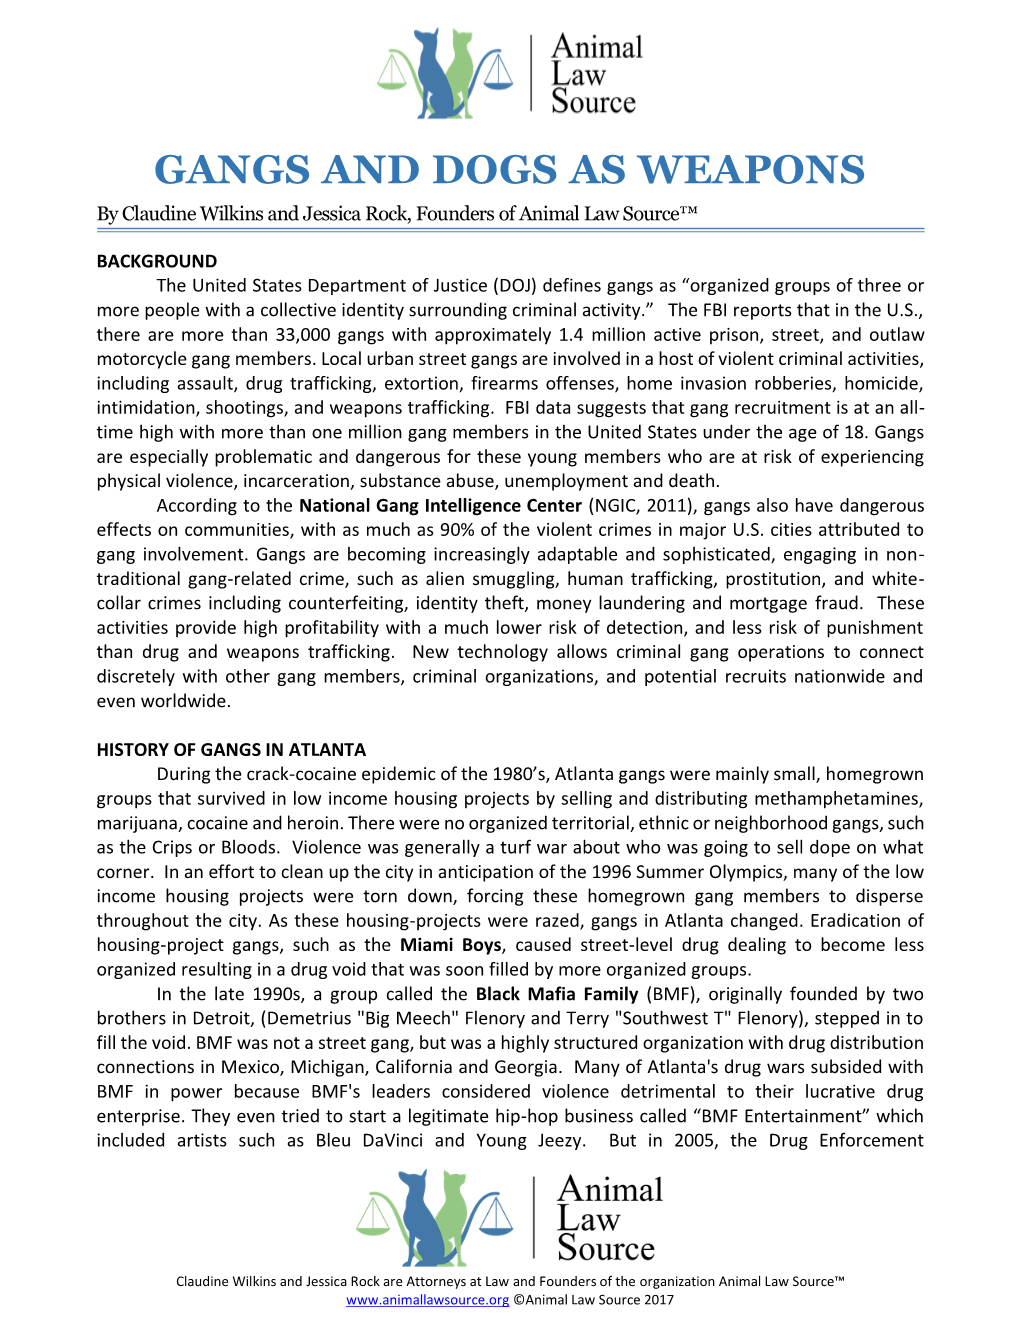 GANGS and DOGS AS WEAPONS by Claudine Wilkins and Jessica Rock, Founders of Animal Law Source™